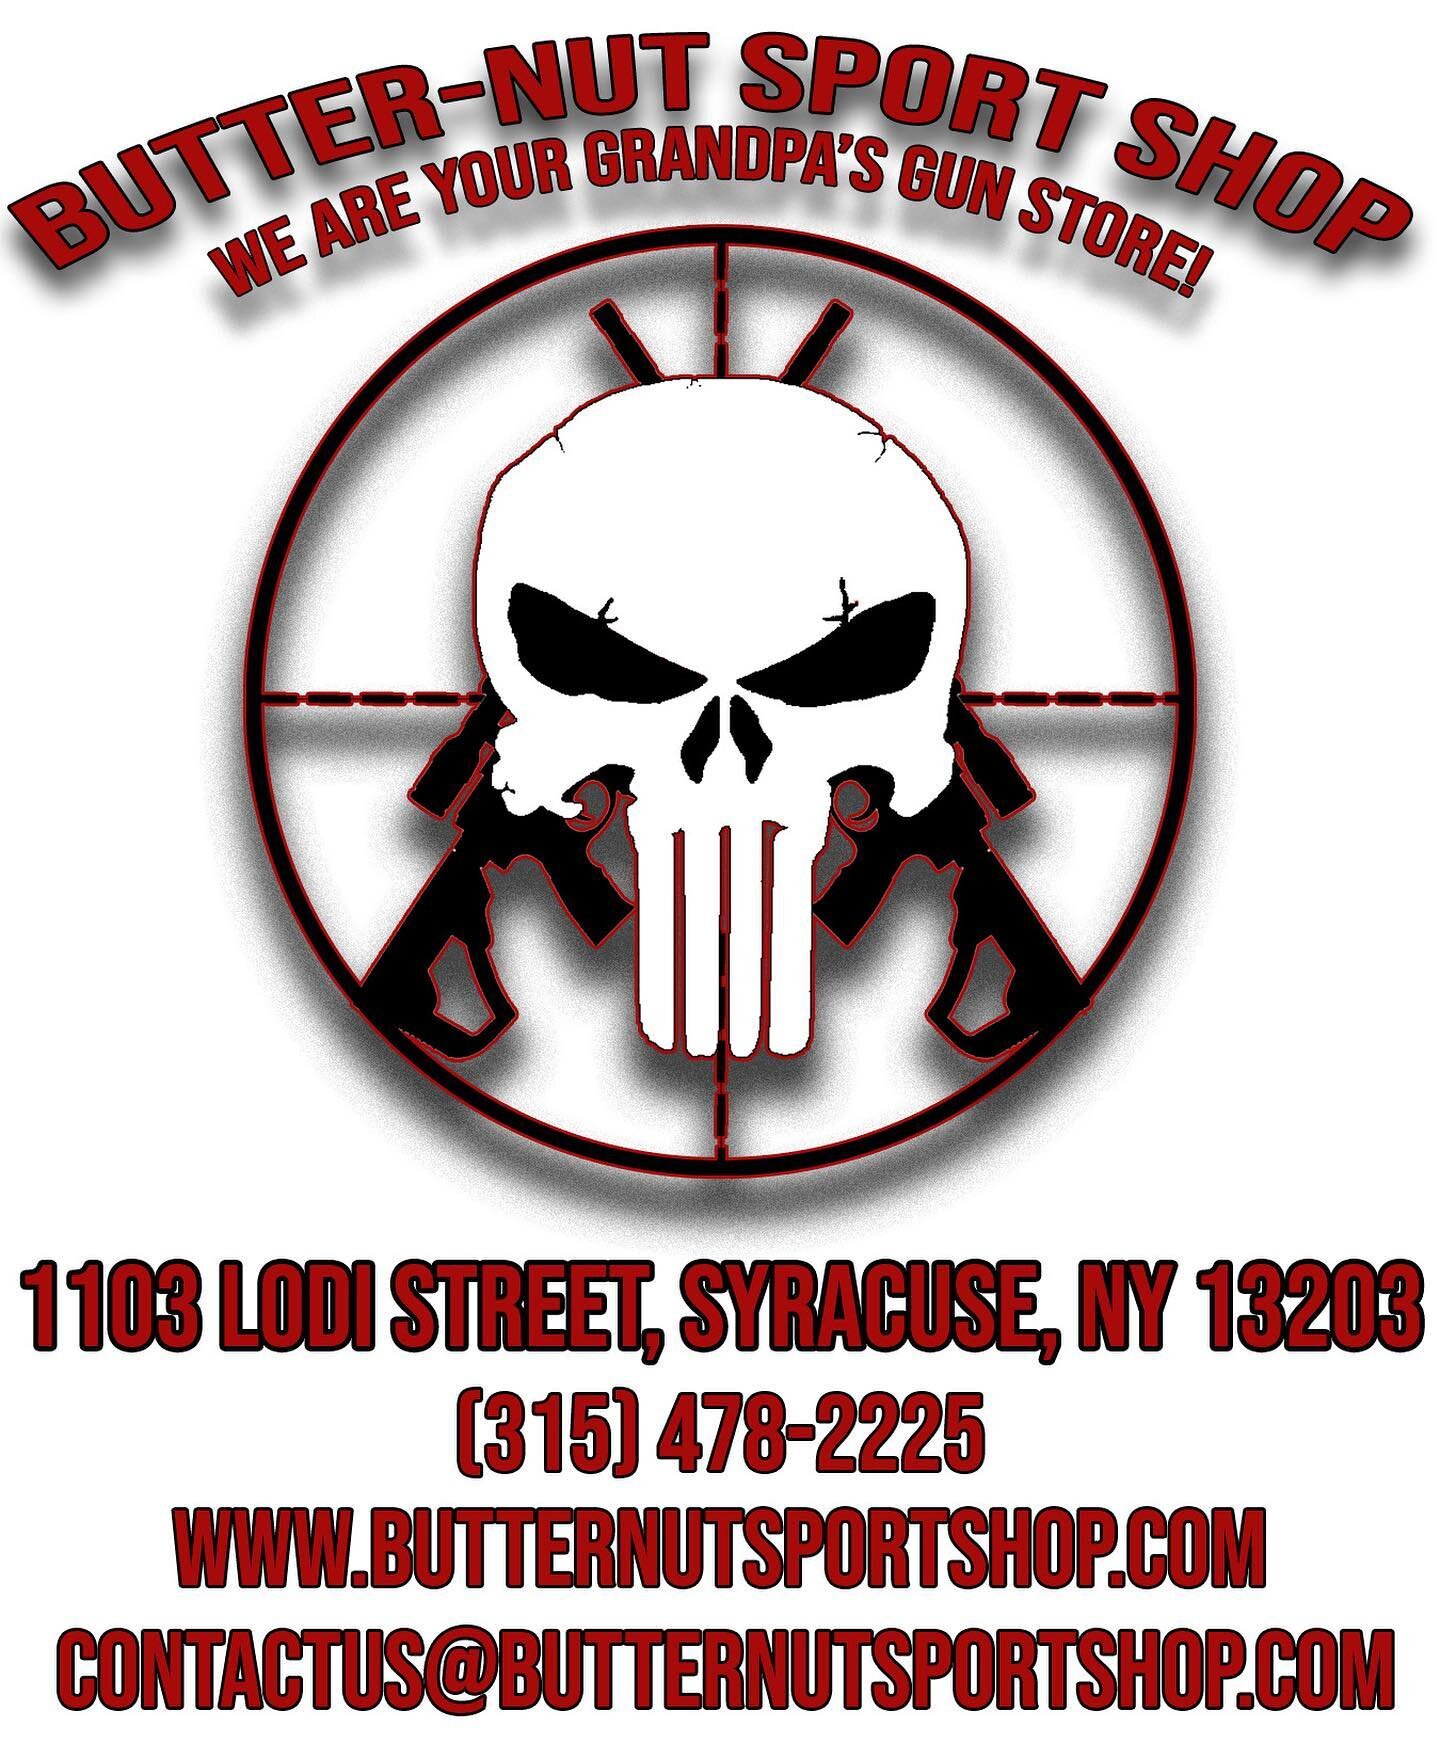 Check out our updated website!

https://www.butternutsportshop.com/